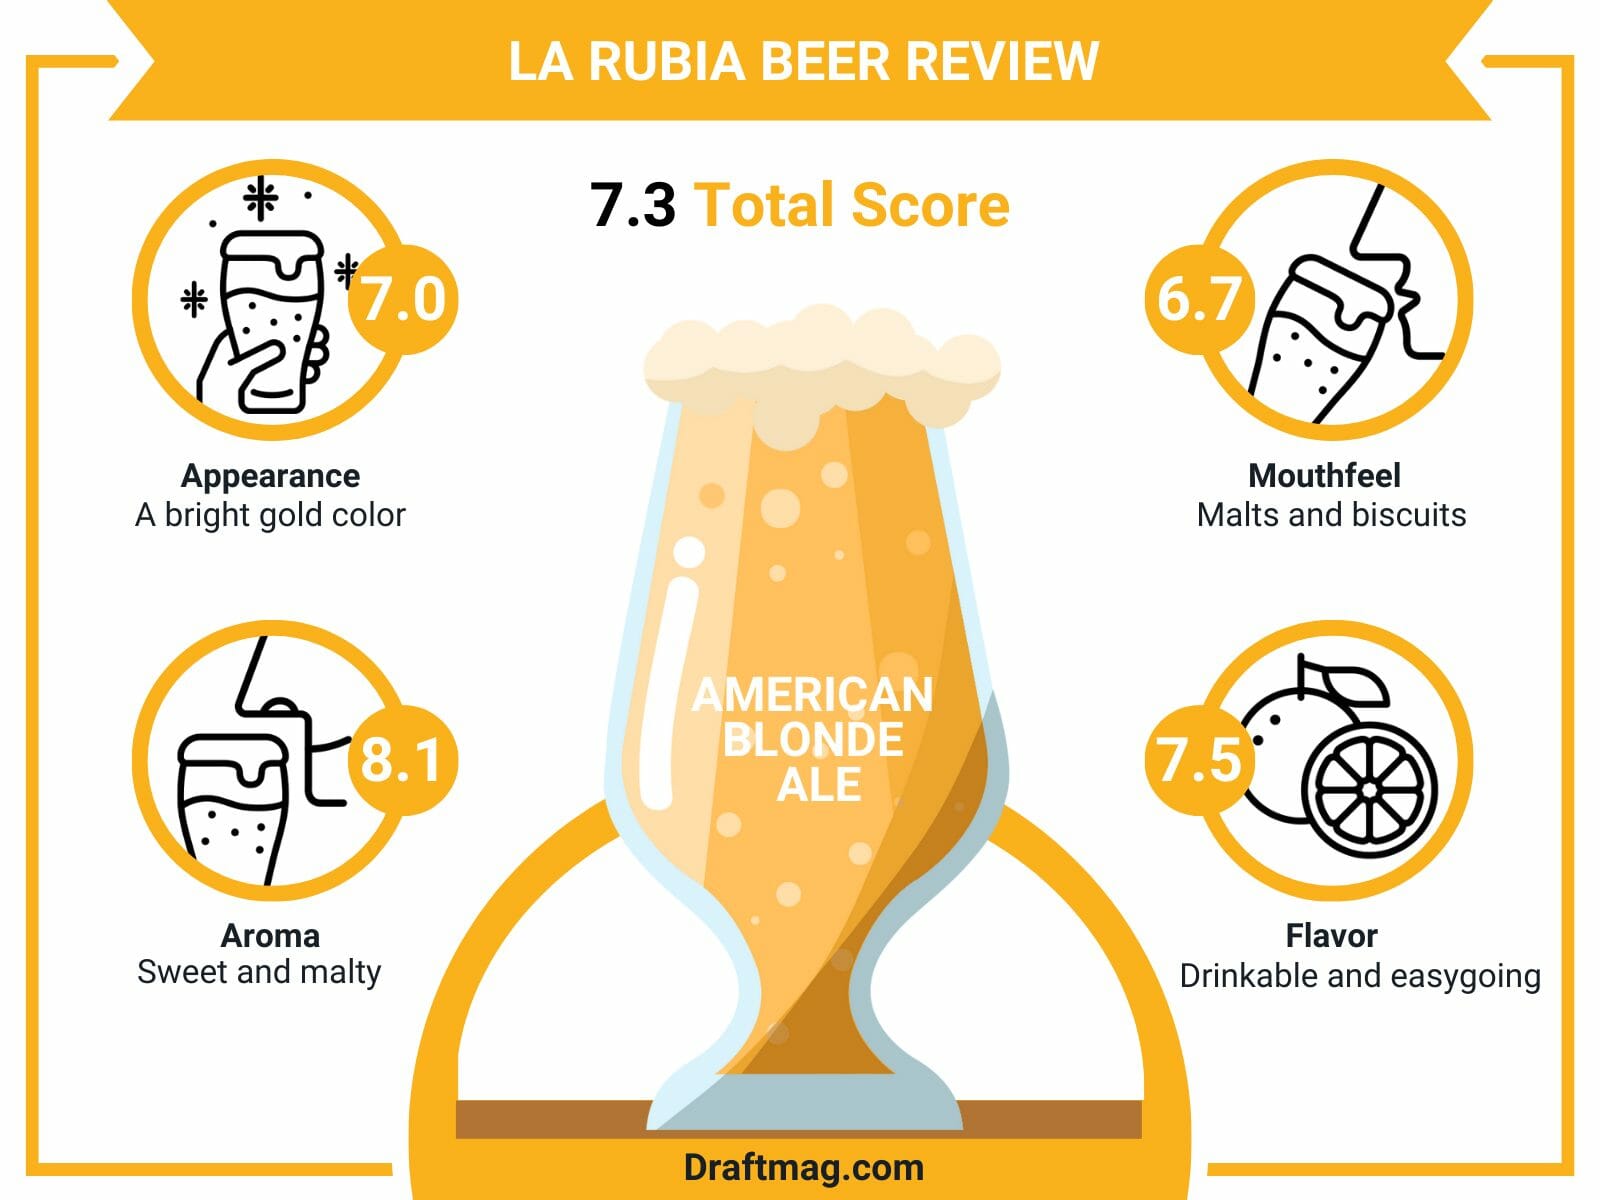 La rubia beer review infographic